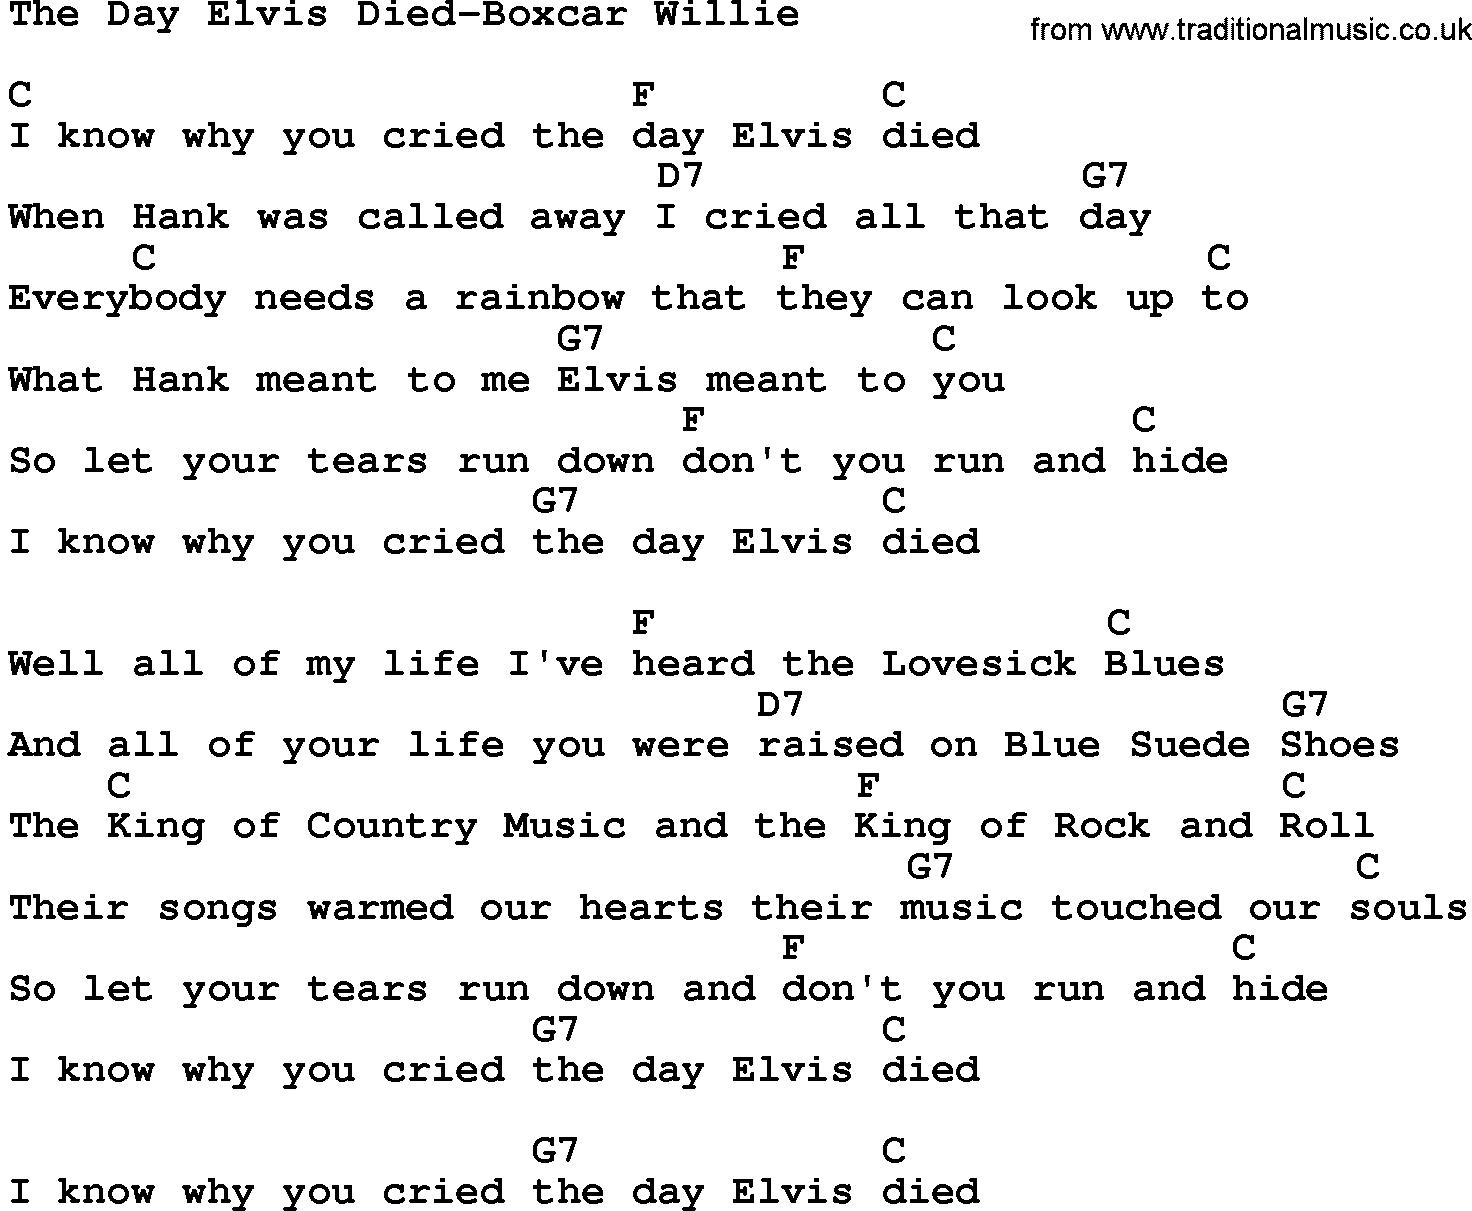 Country music song: The Day Elvis Died-Boxcar Willie lyrics and chords